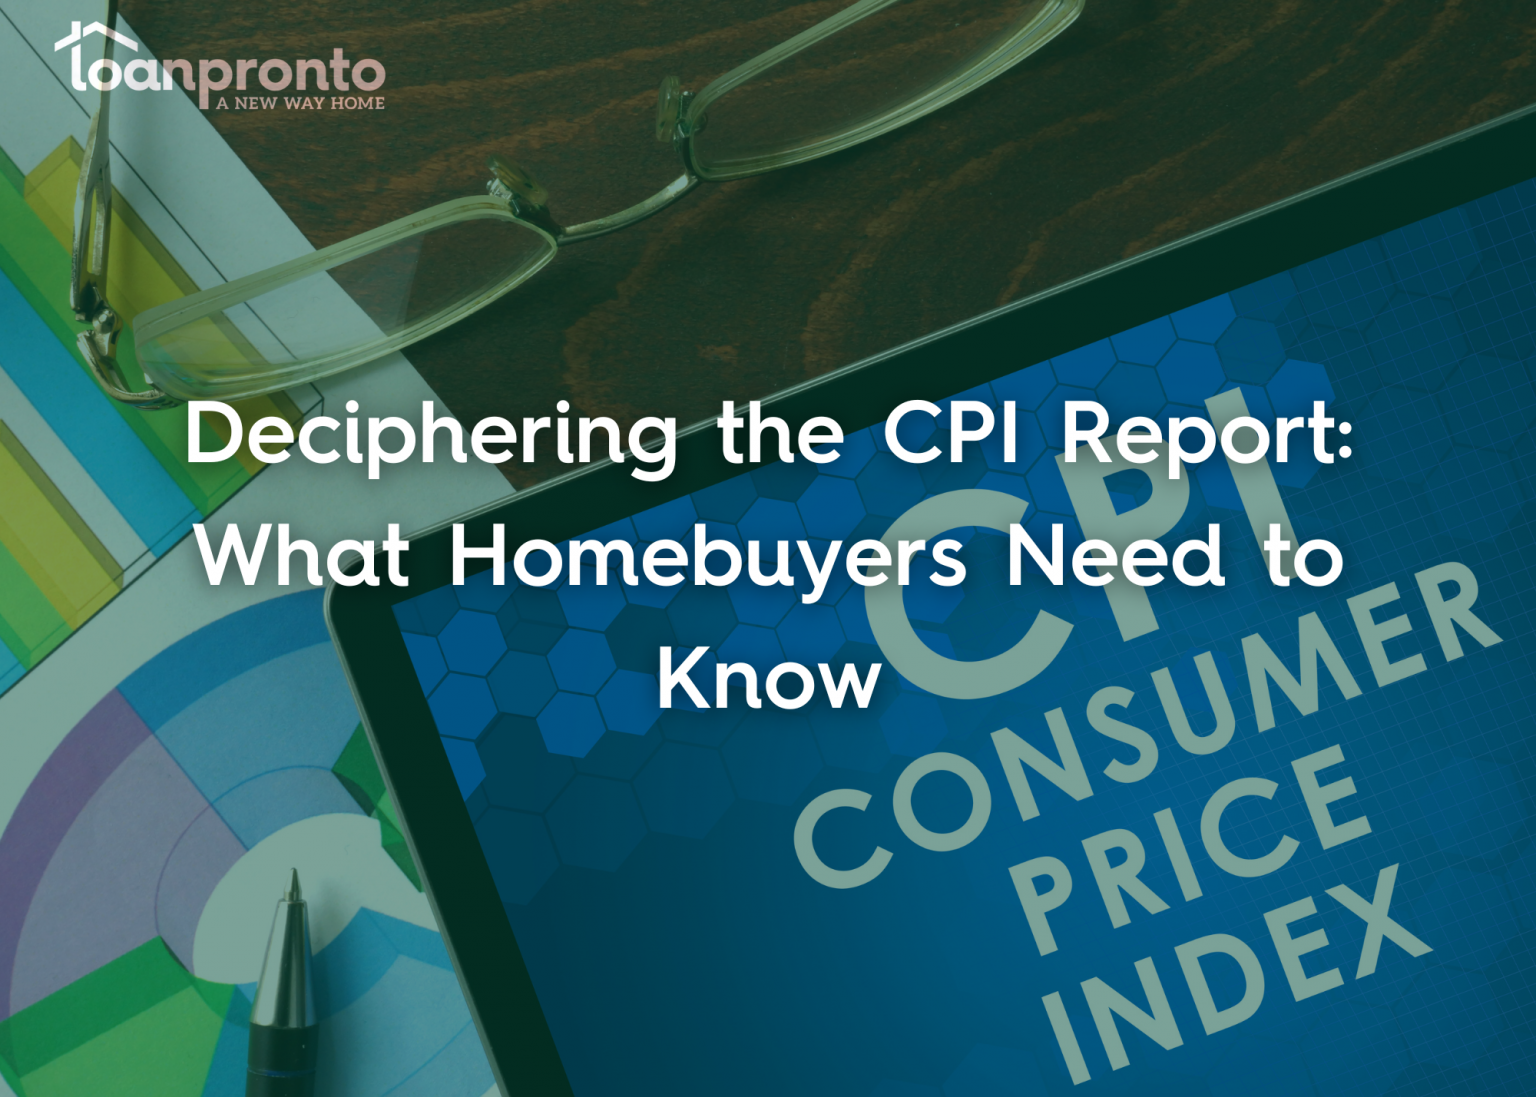 Deciphering the CPI report and inflation, what homebuyers need to know